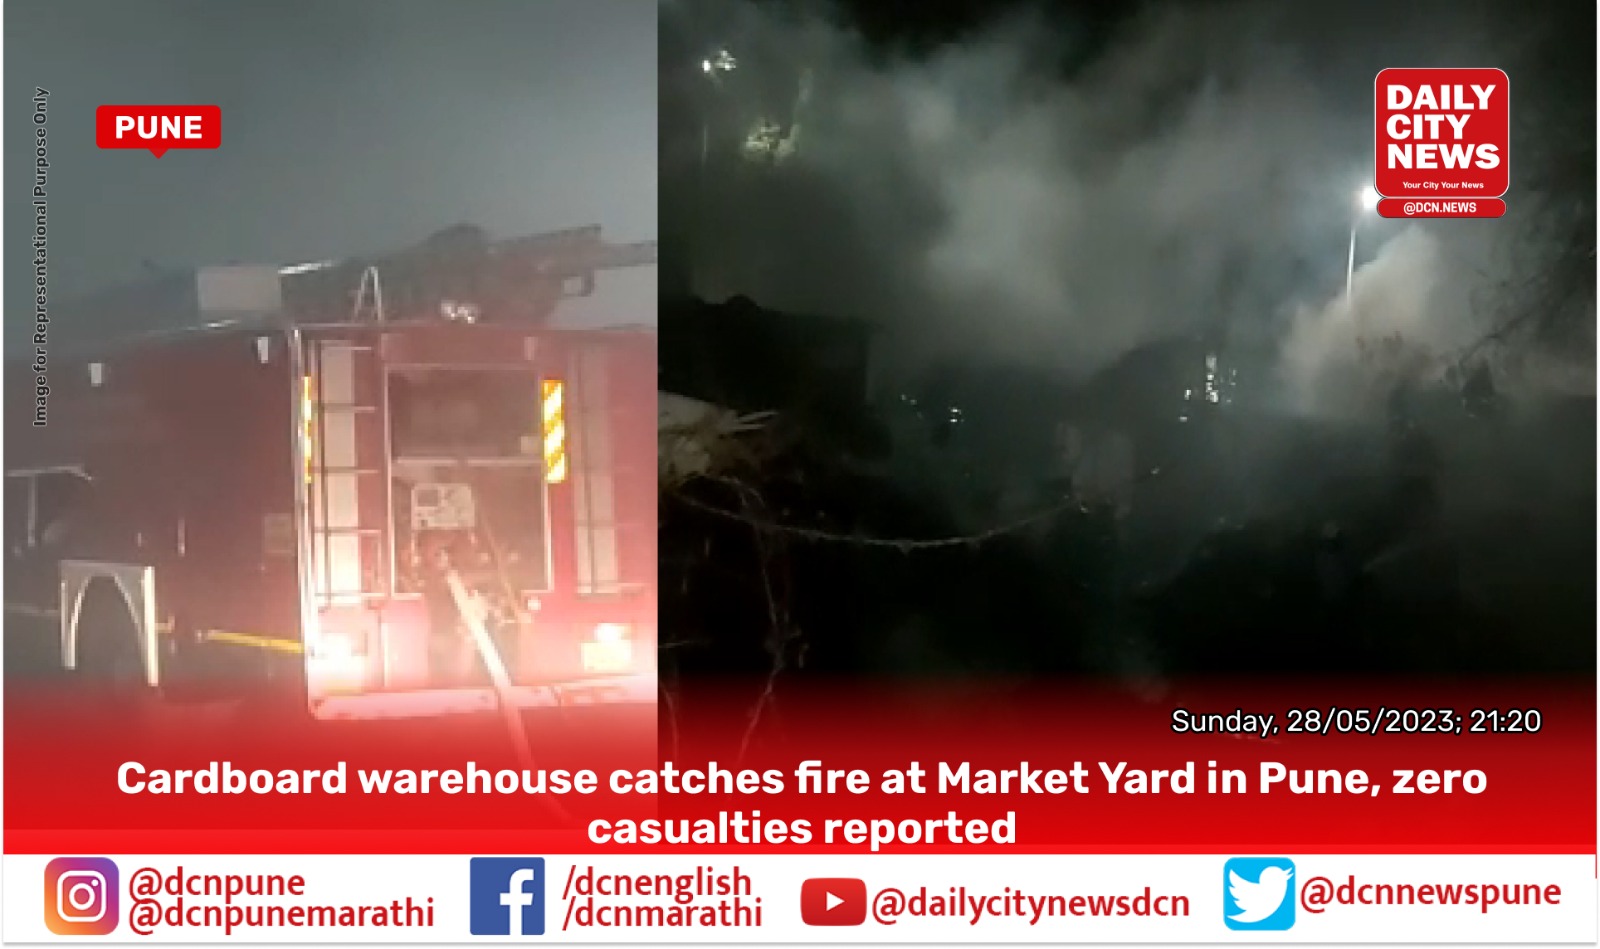 Cardboard warehouse catches fire at Market Yard in Pune, zero casualties reported